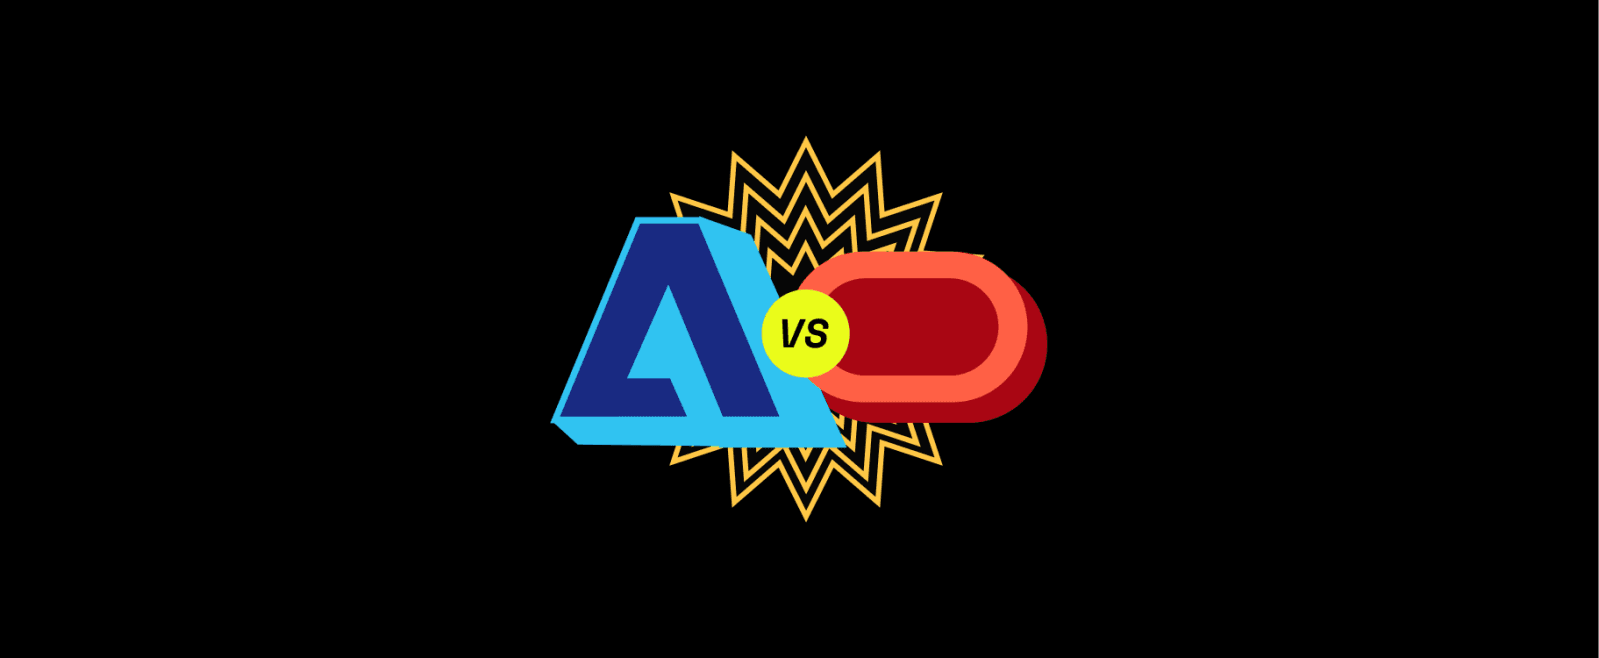 Adobe Commerce vs. Oracle Commerce: Which eCommerce Platform Reigns Supreme?